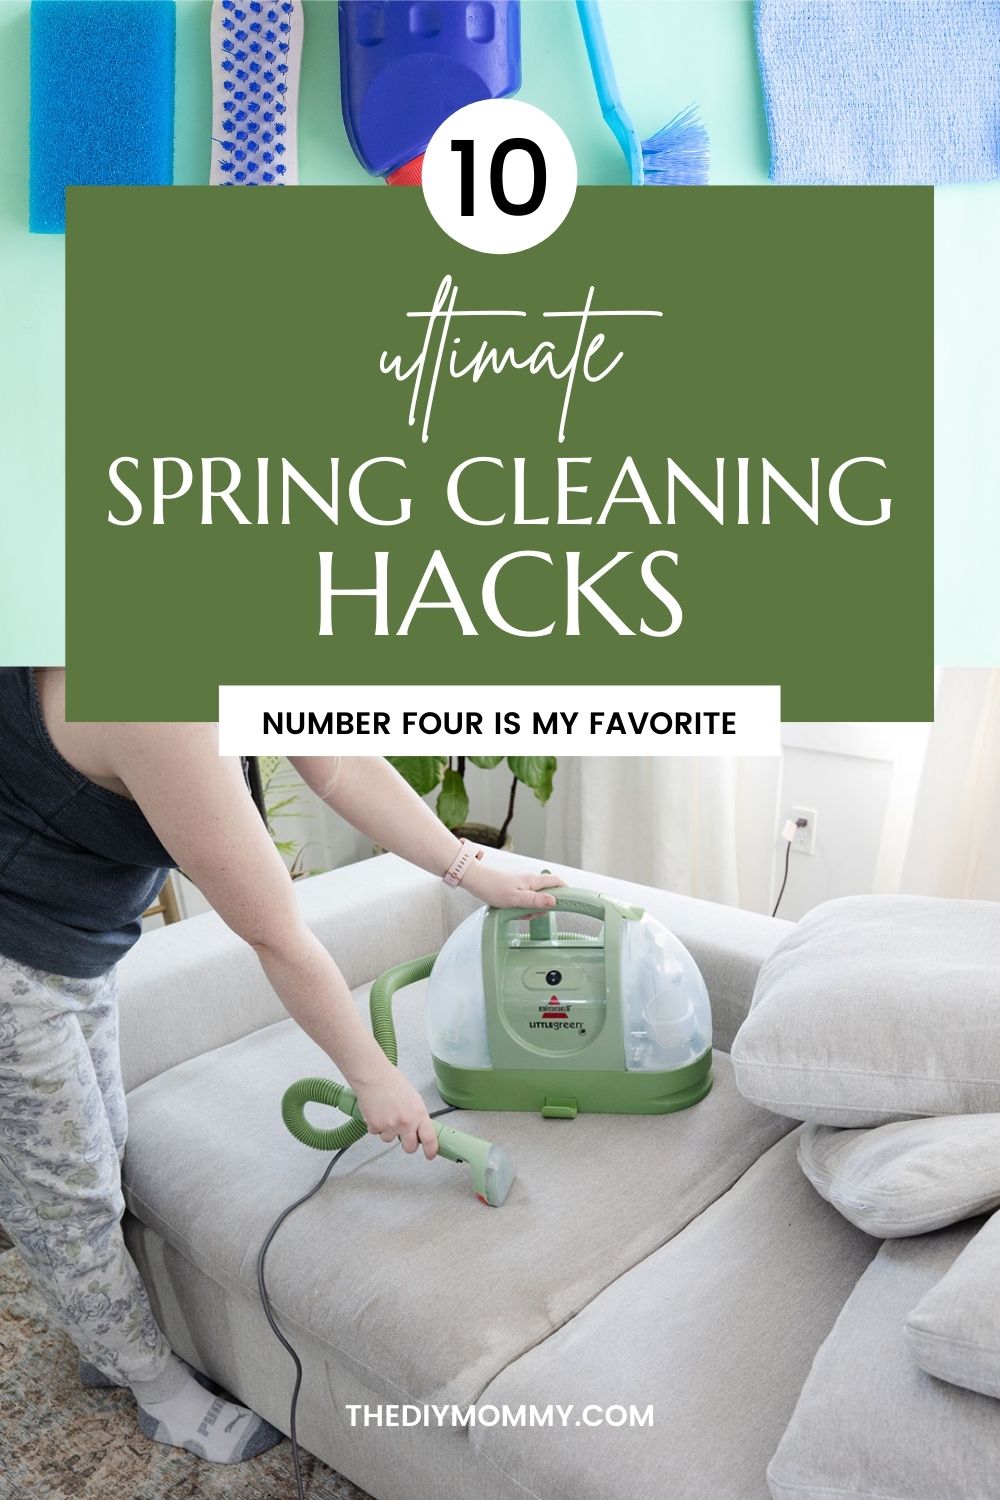 10 ultimate Spring Cleaning Hacks that actually work!